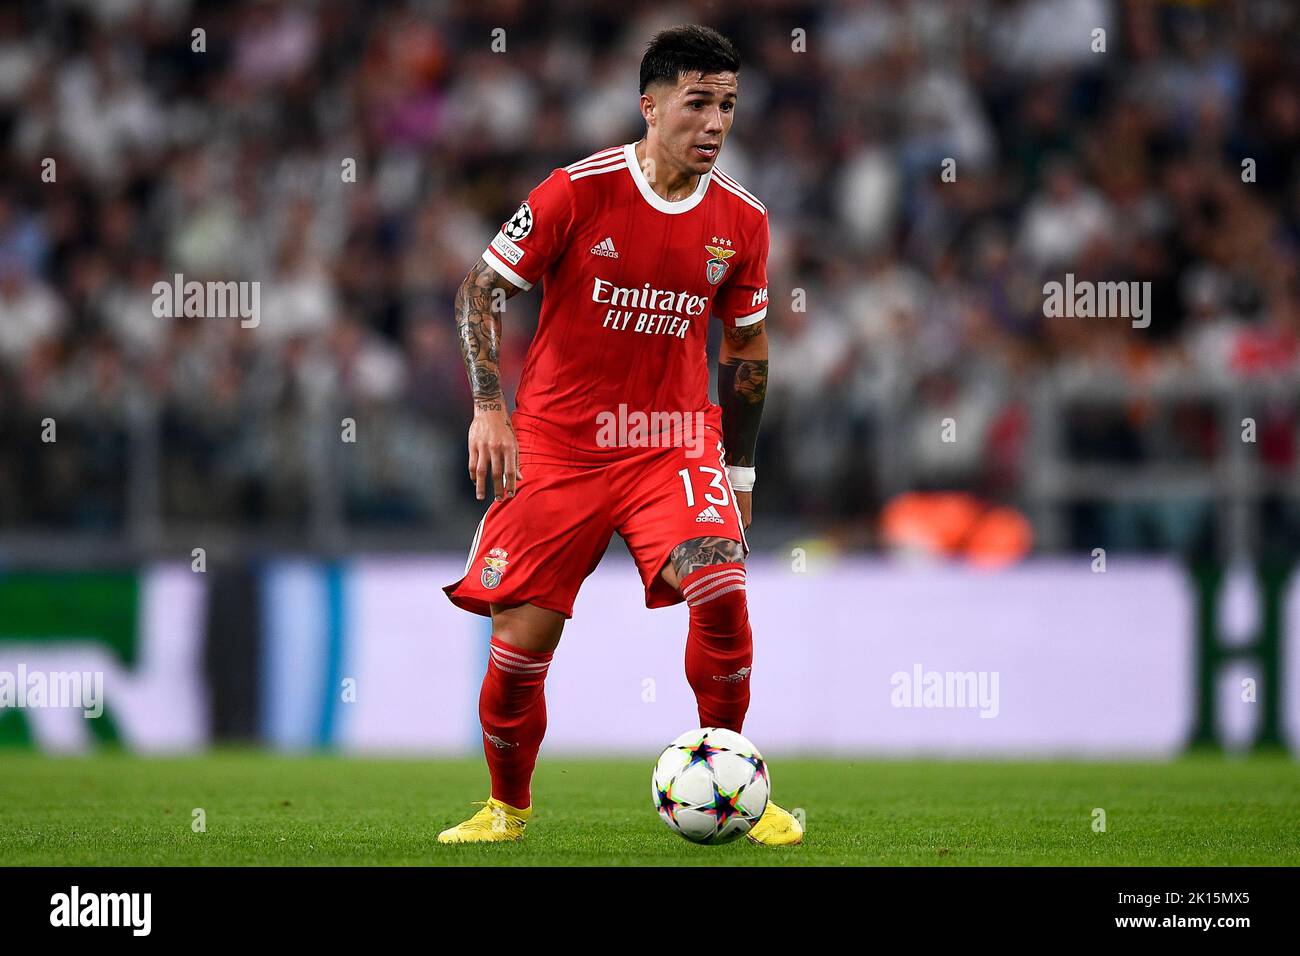 Turin, Italy. 14 September 2022. Enzo Fernandez of SL Benfica in action during the UEFA Champions League football match between Juventus FC and SL Benfica. Credit: Nicolò Campo/Alamy Live News Stock Photo